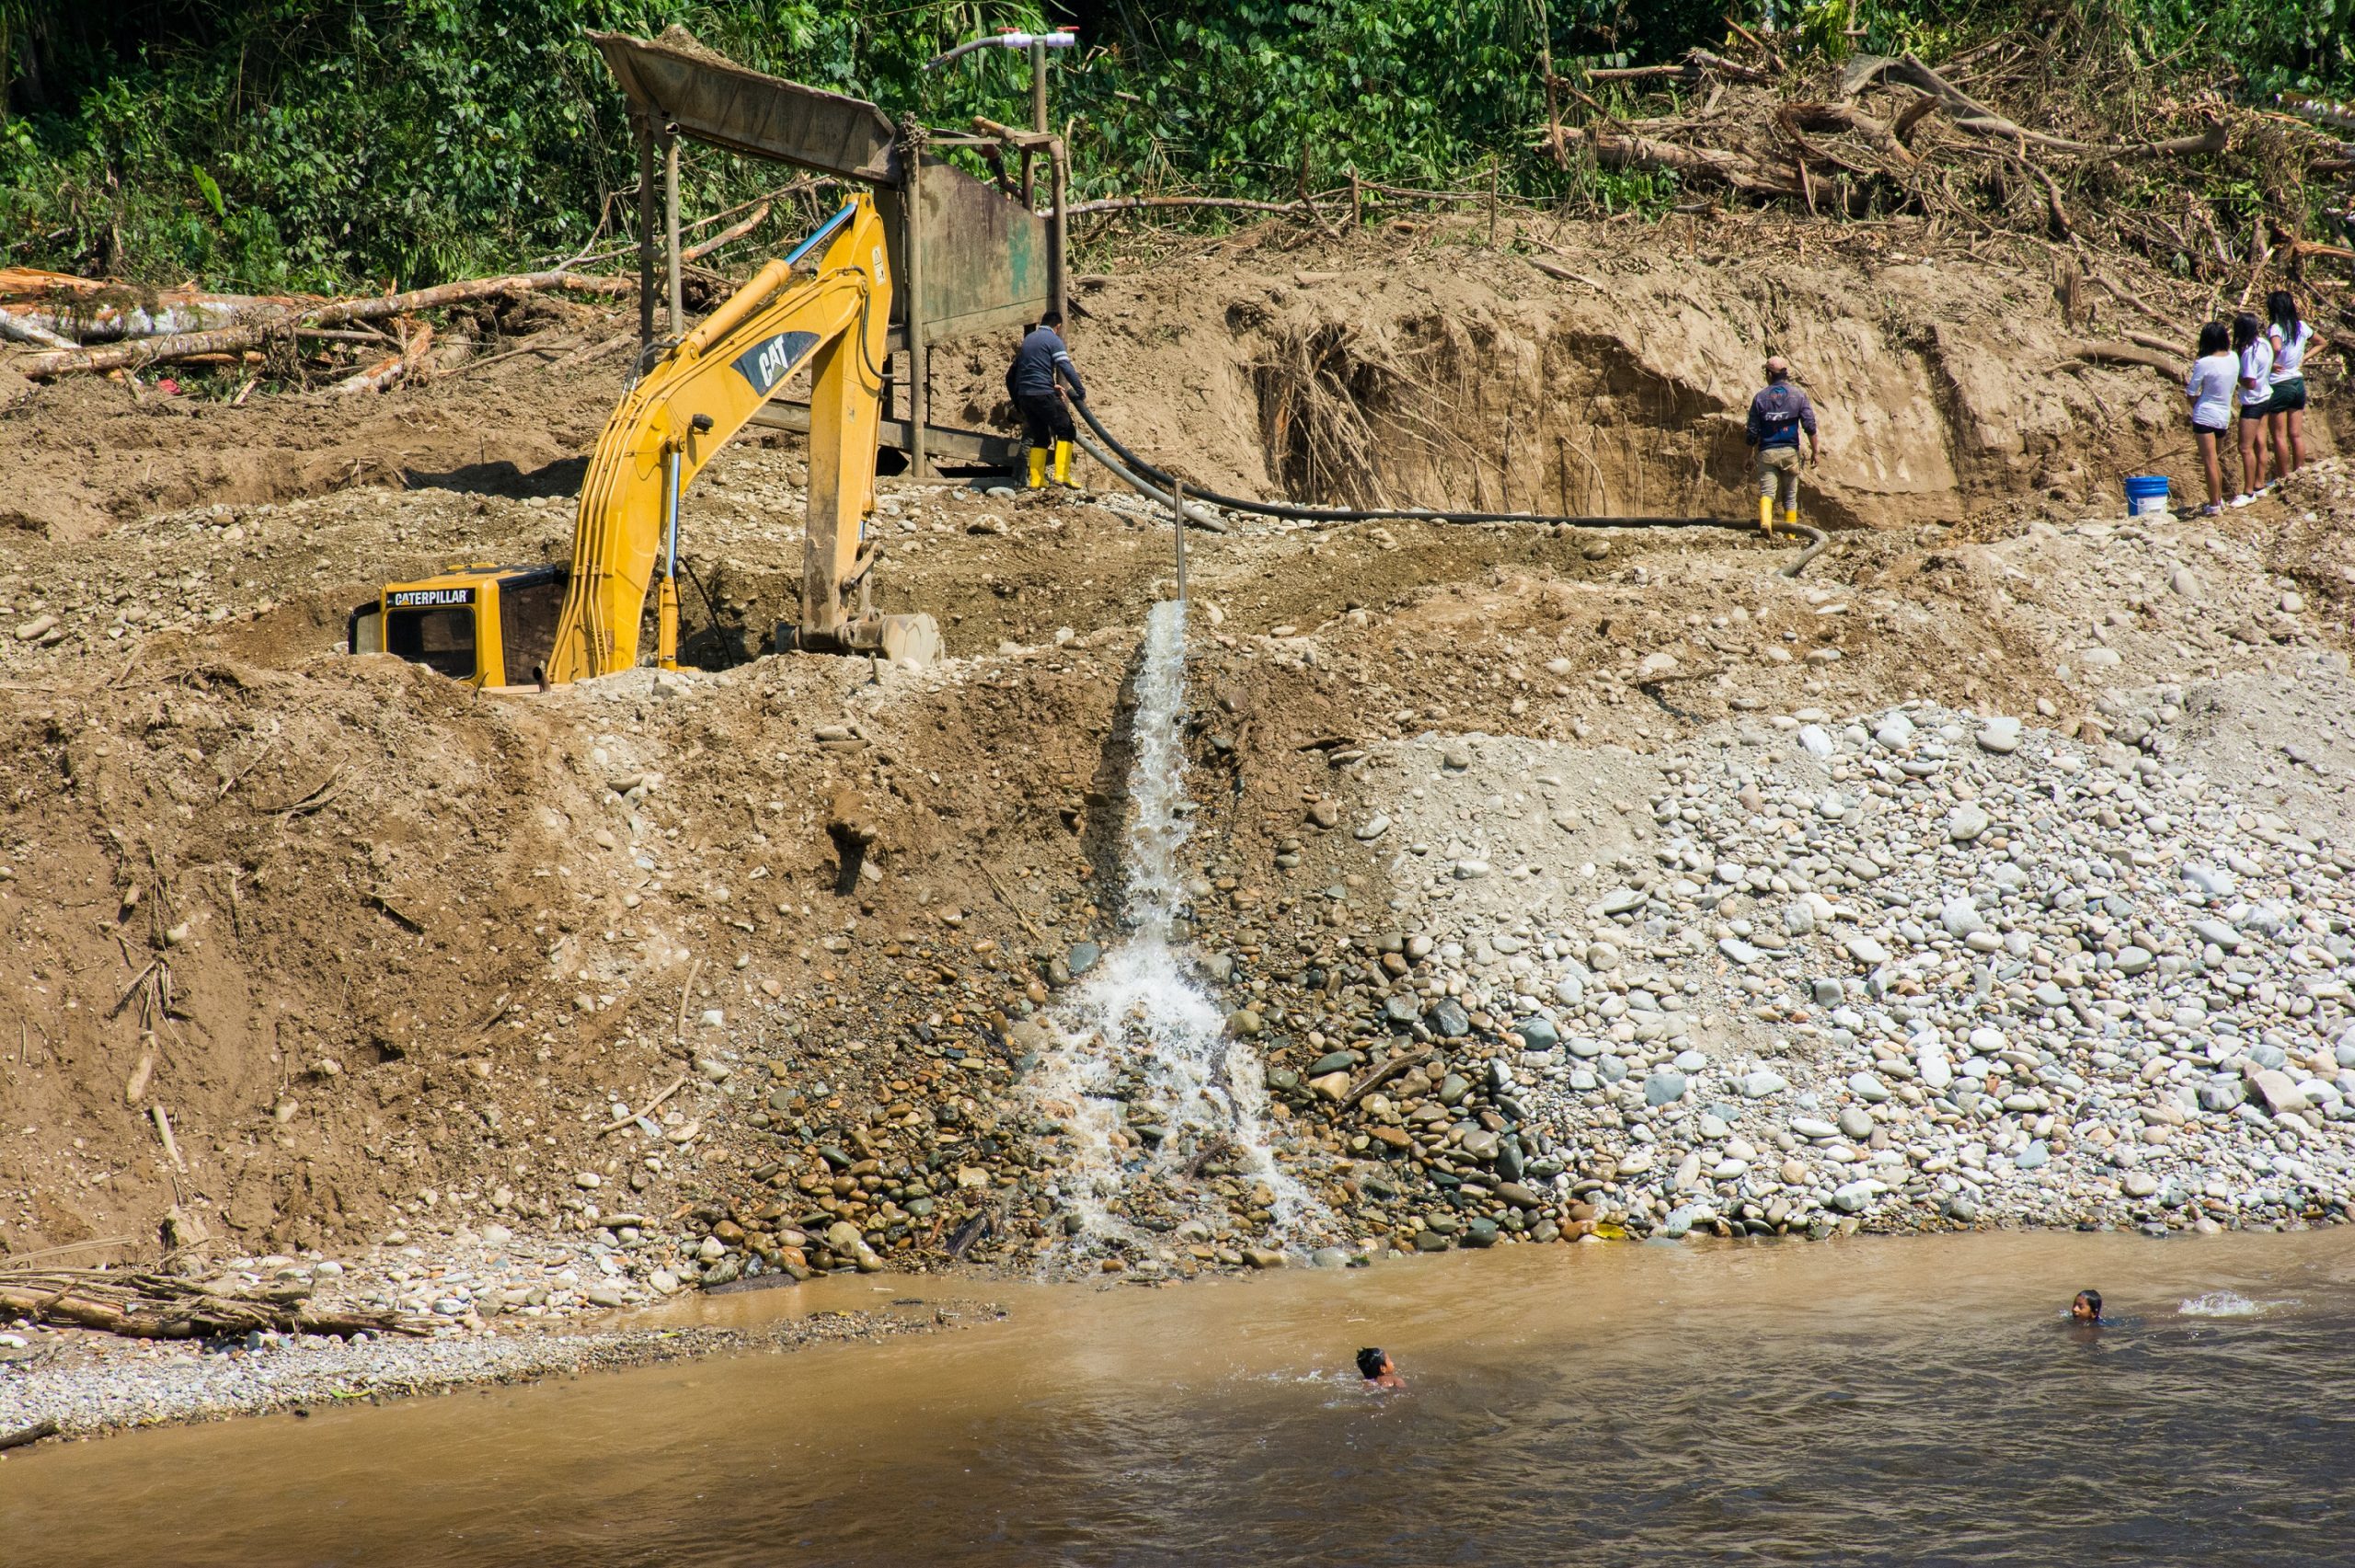 Two children play in the upper basin of the Nangaritza River, while a group of miners extract gold in the Shaime community. Photo taken in 2018 by Carlos Medina.